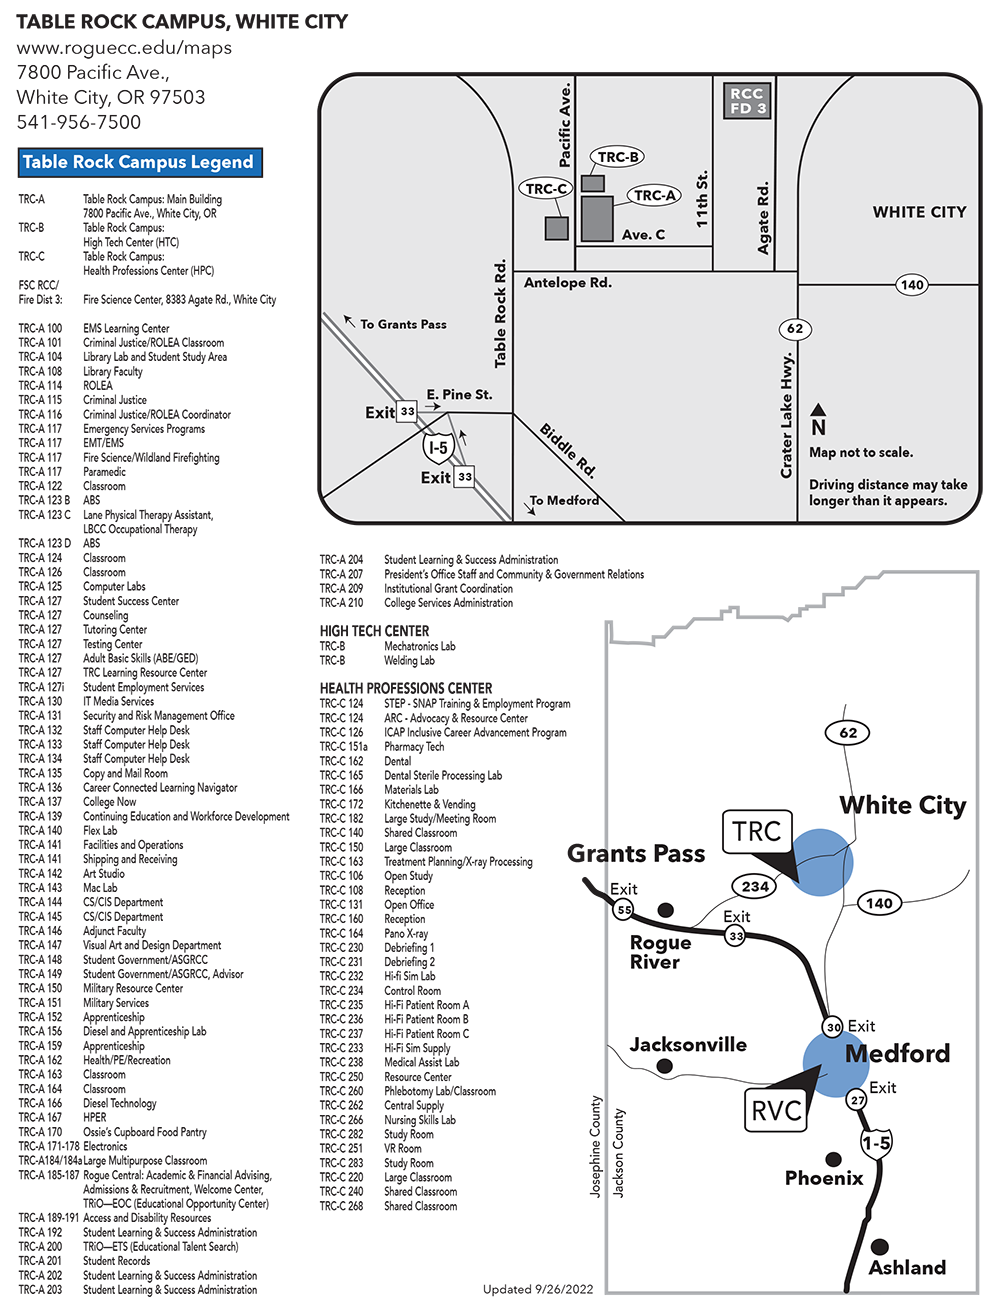 RCC White City Table Rock Campus Map